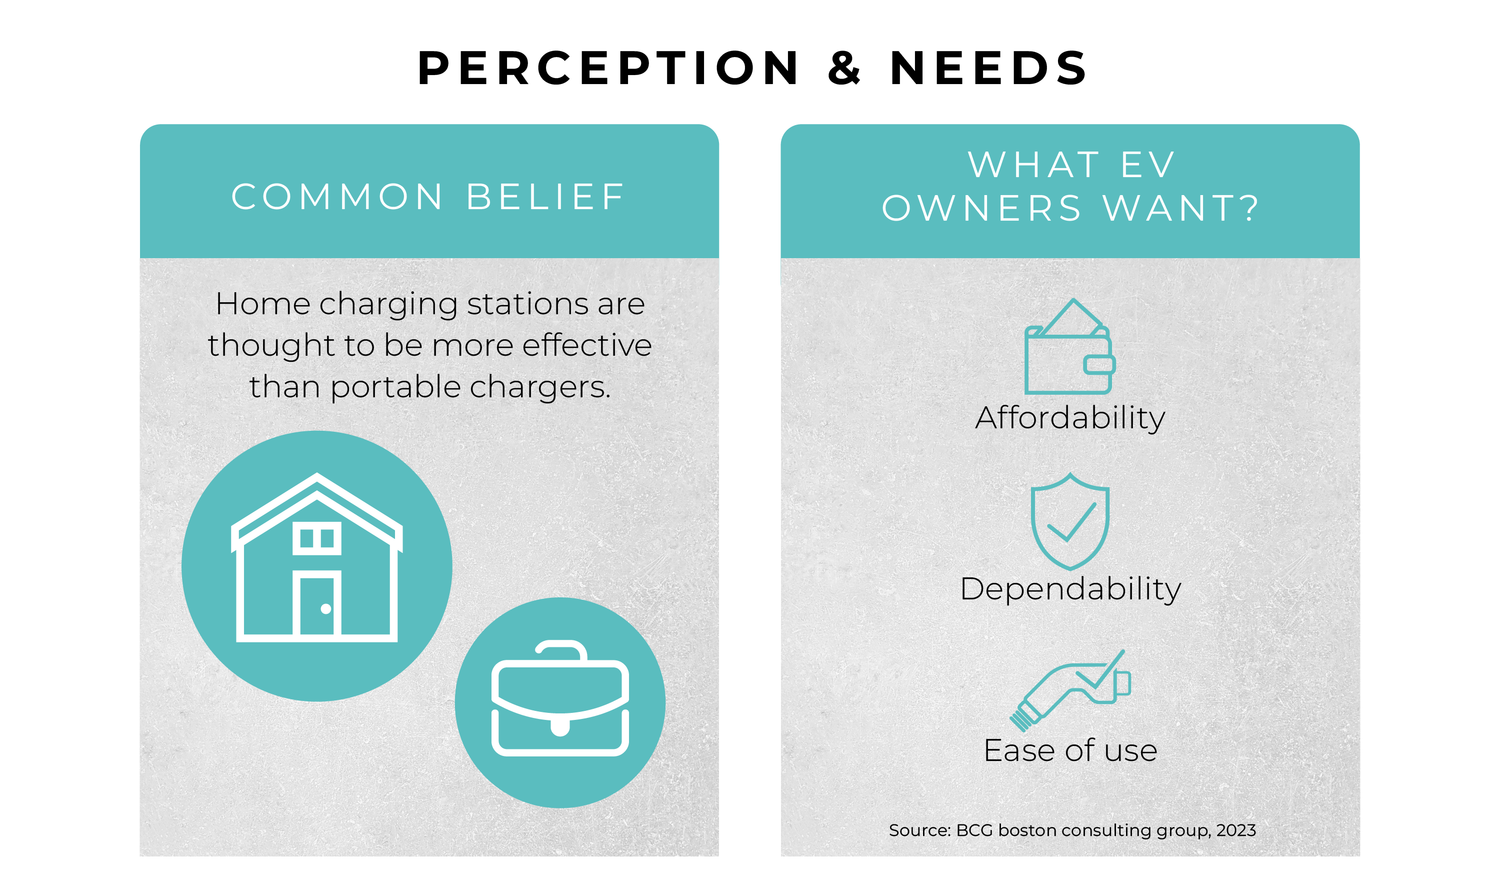 What Are EV Owners Looking For?